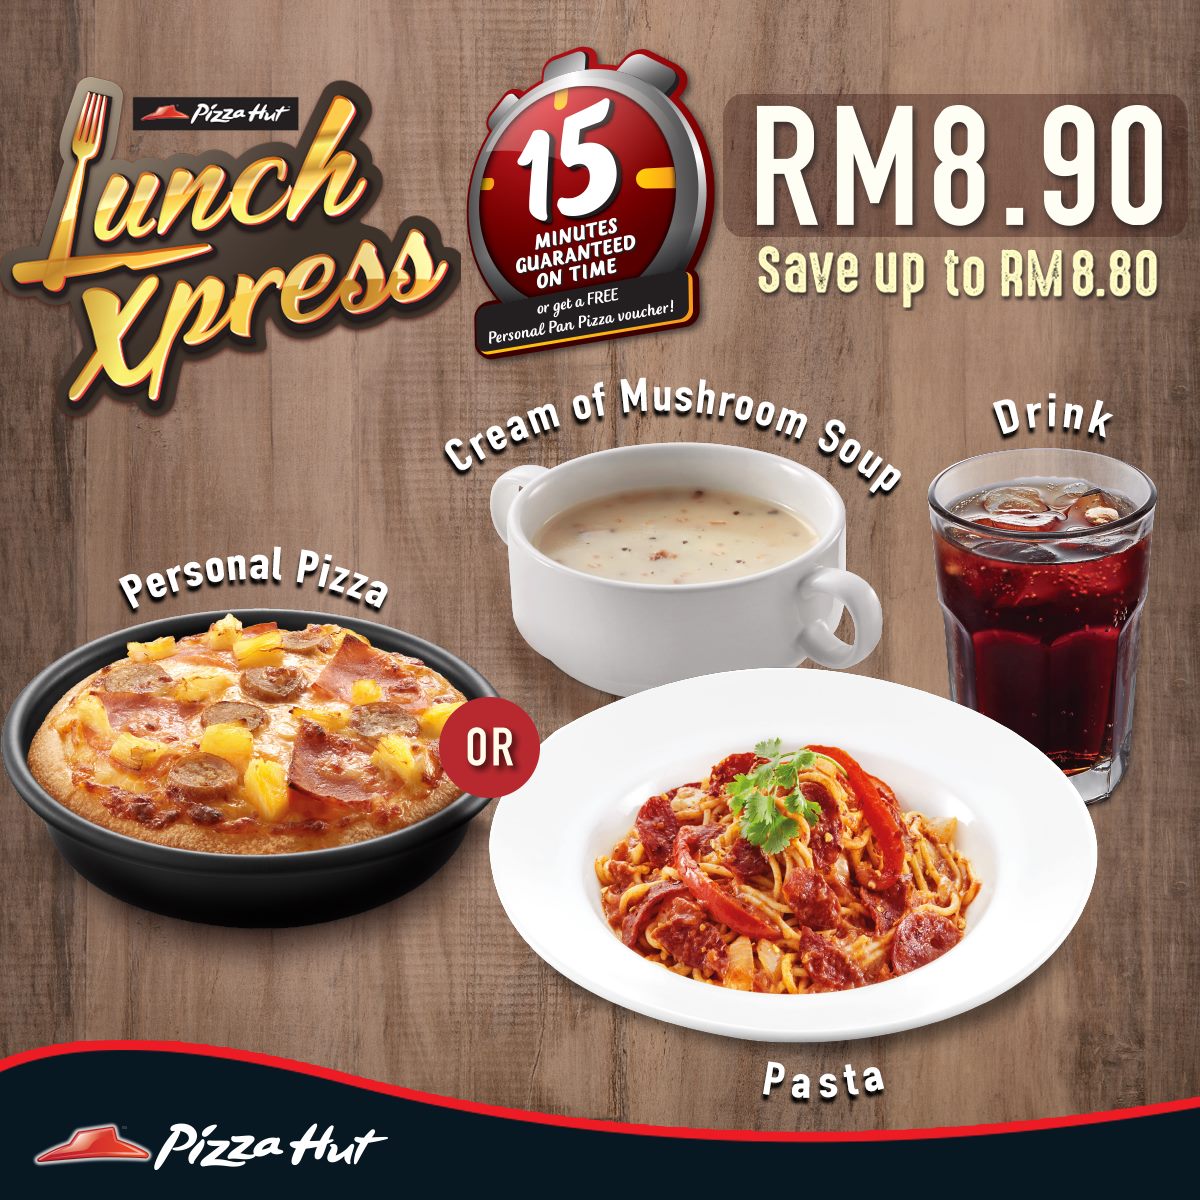 Pizza Hut Lunch Xpress Menu Pizza Or Pasta Combo Set Rm8 90 Save Rm8 80 11am 2pm Weekdays